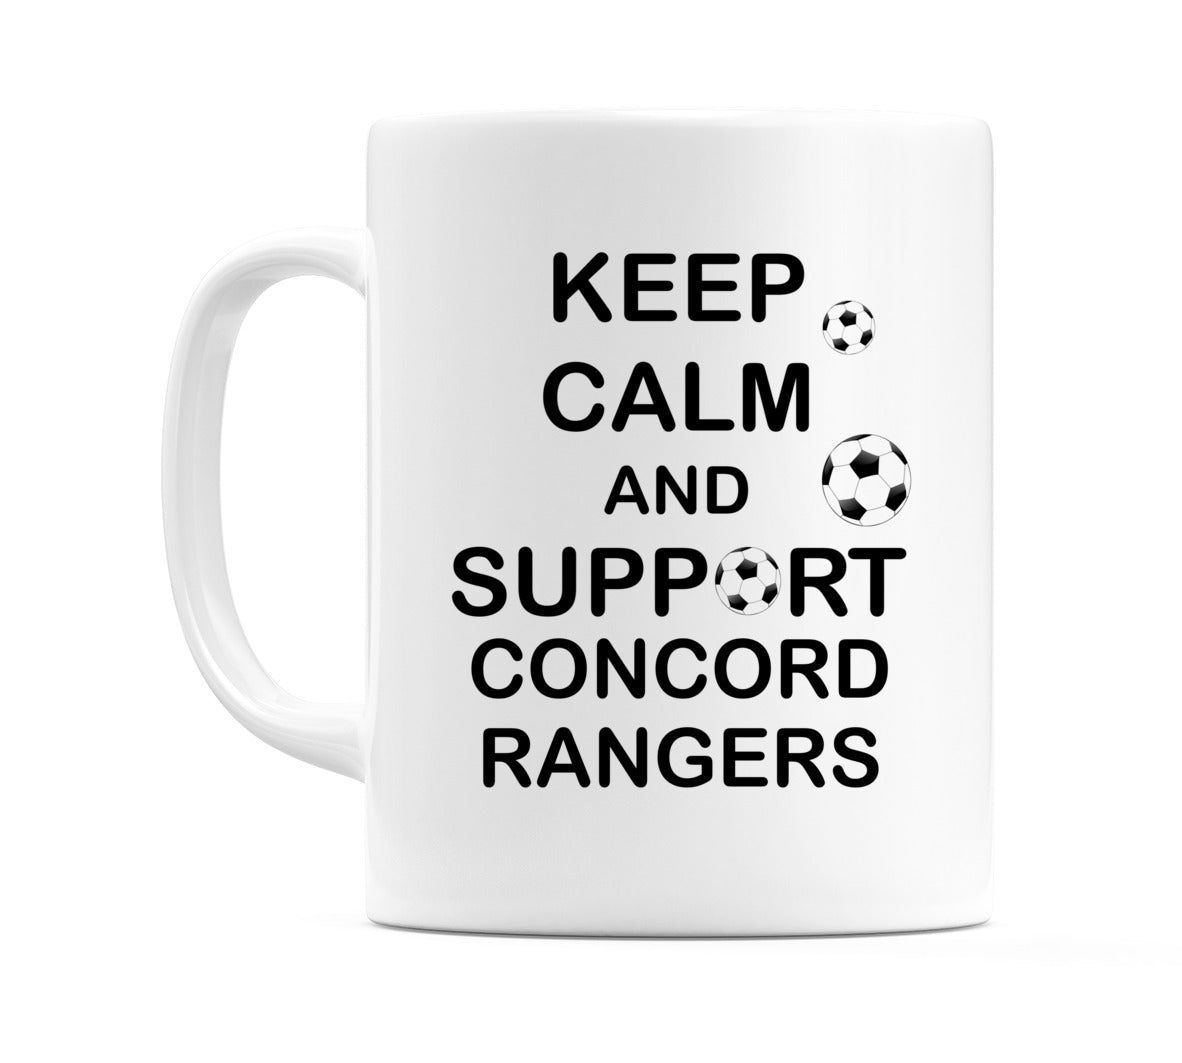 Keep Calm And Support Concord Rangers Mug